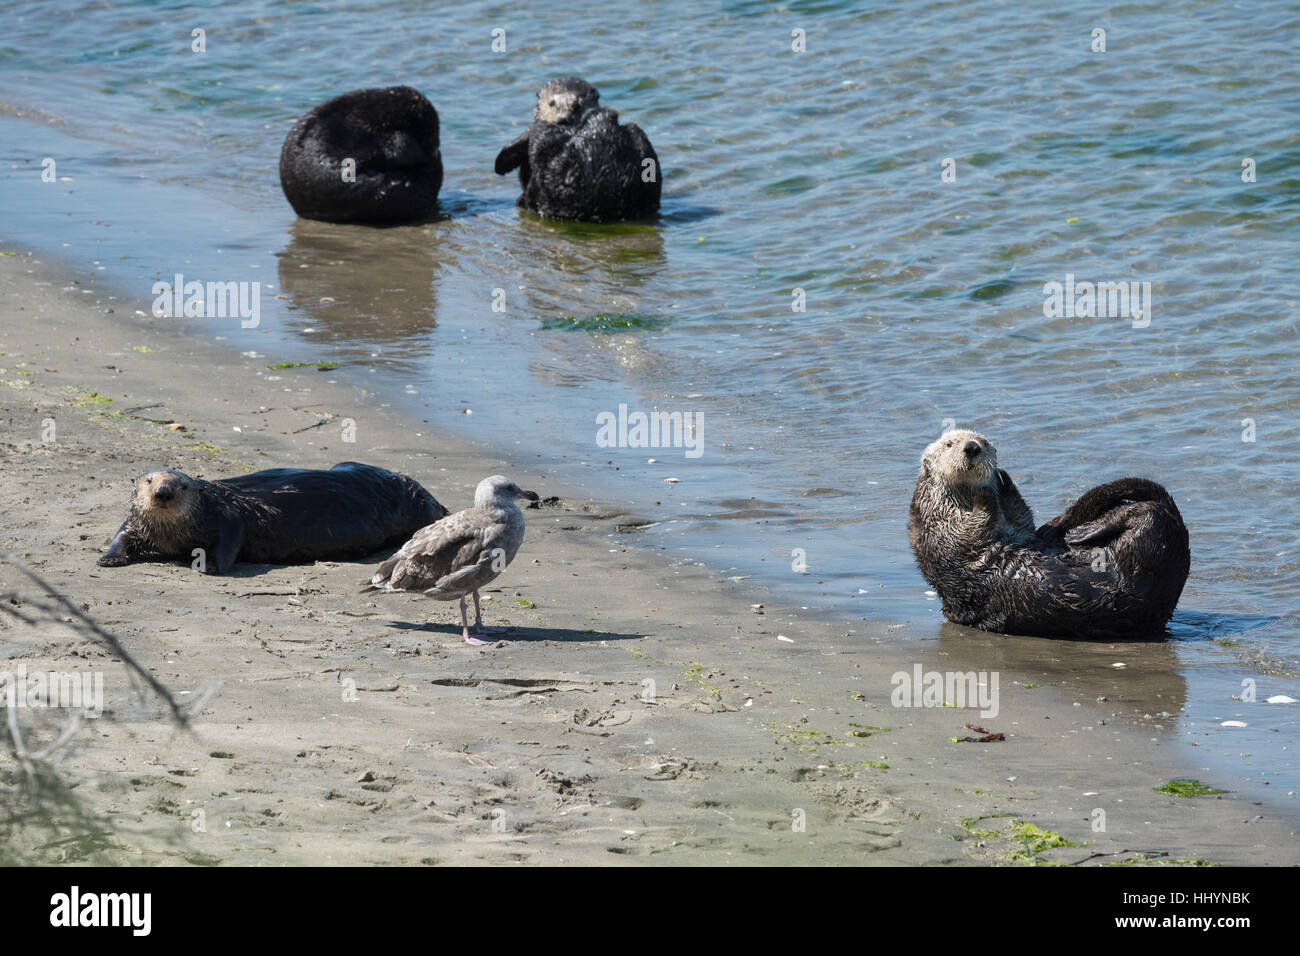 a juvenile western gull, Larus occidentalis watches as California sea otters or southern sea otters, Enhydra lutris nereis, bask on the beach, CA, USA Stock Photo